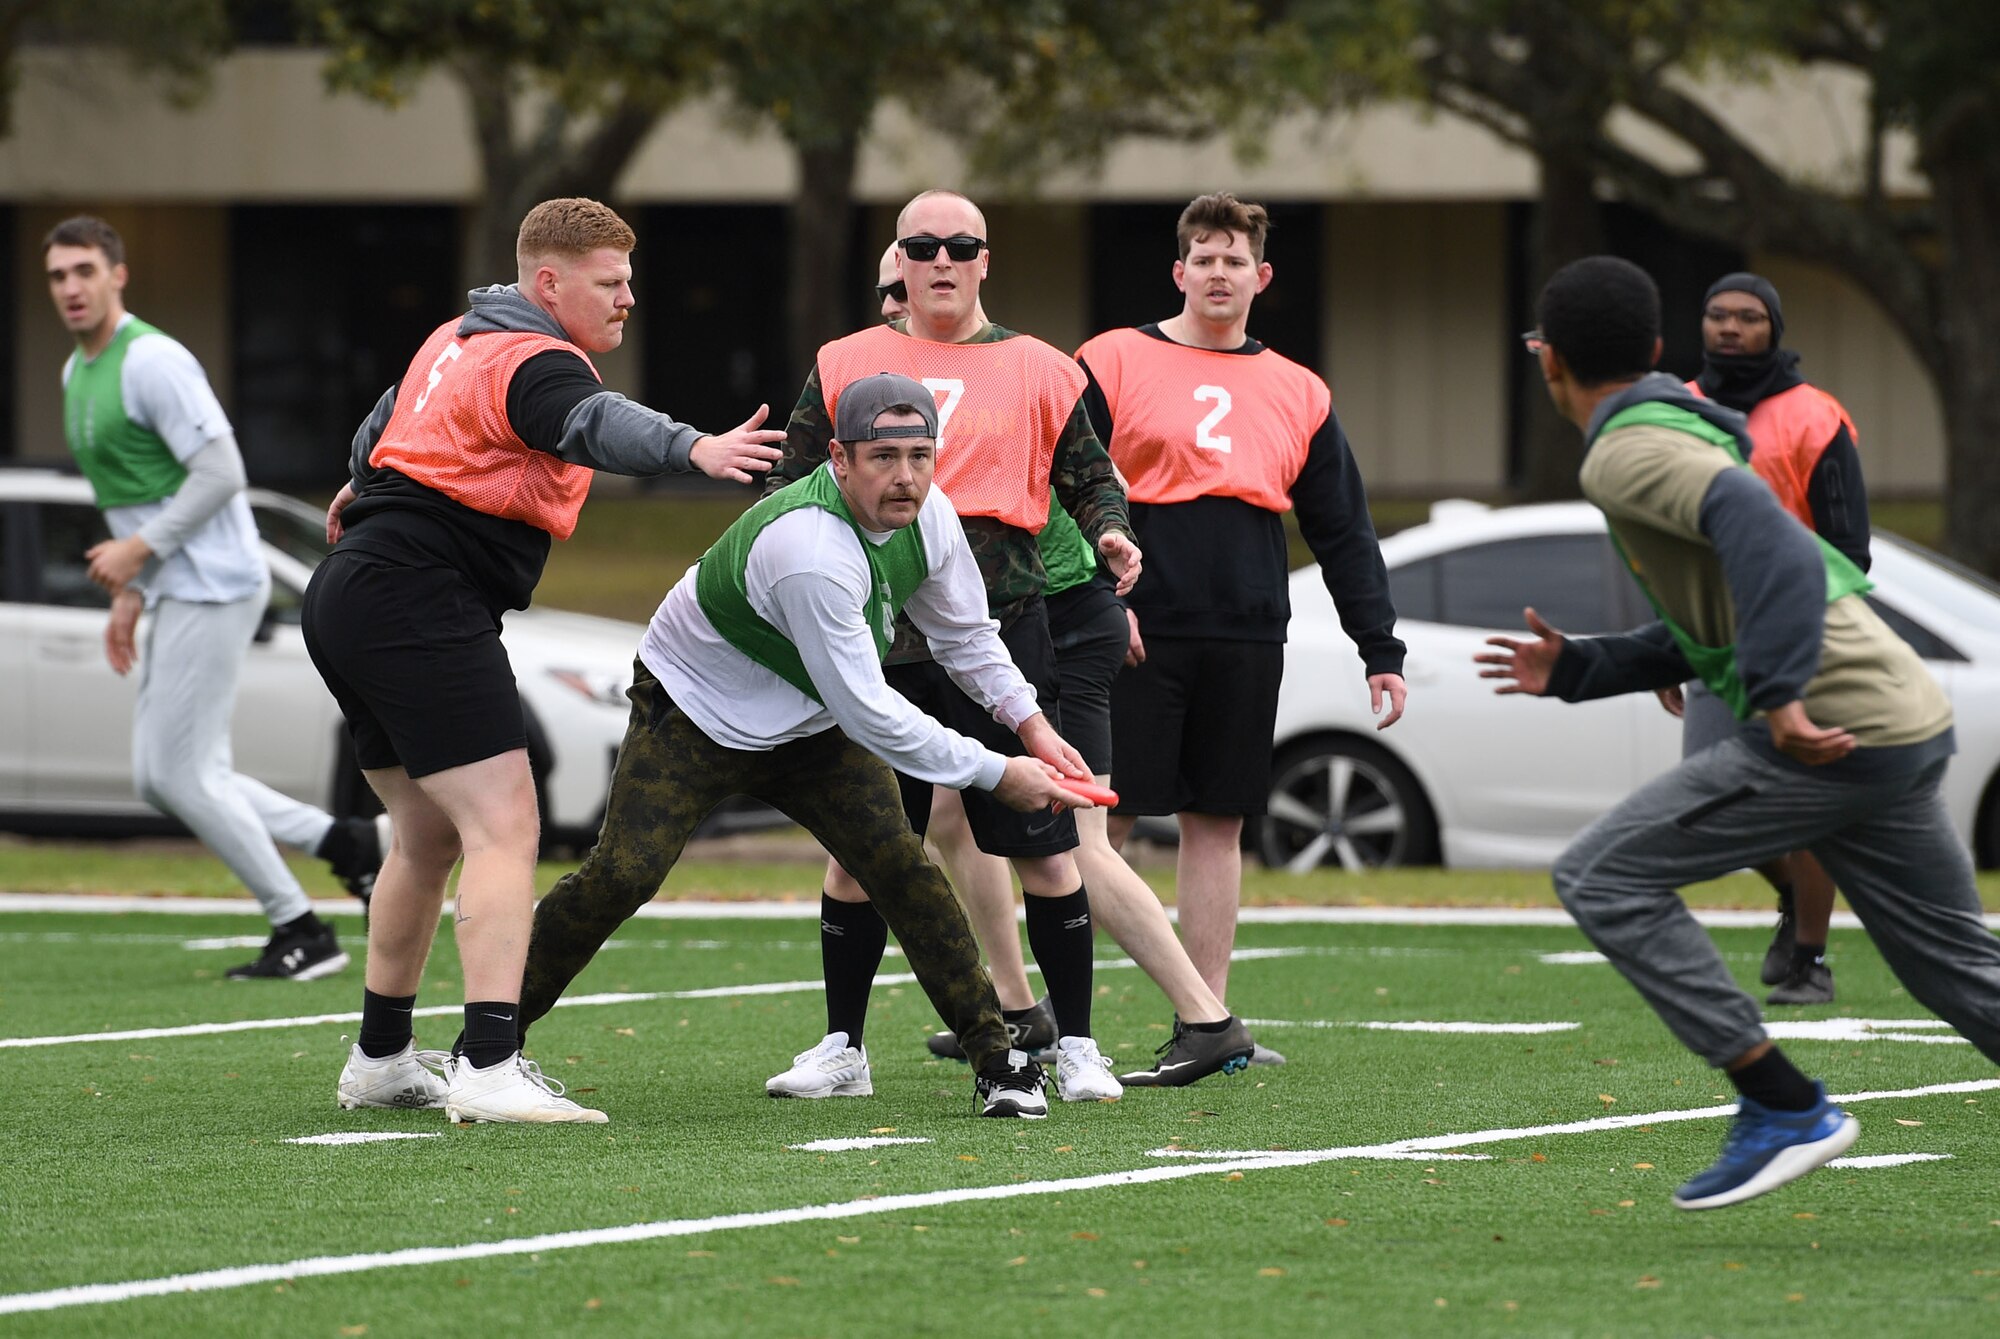 Members of the 338th Training Squadron and the 81st Security Forces Squadron participate in an ultimate frisbee tournament following the turf field ribbon cutting ceremony at Keesler Air Force Base, Mississippi.